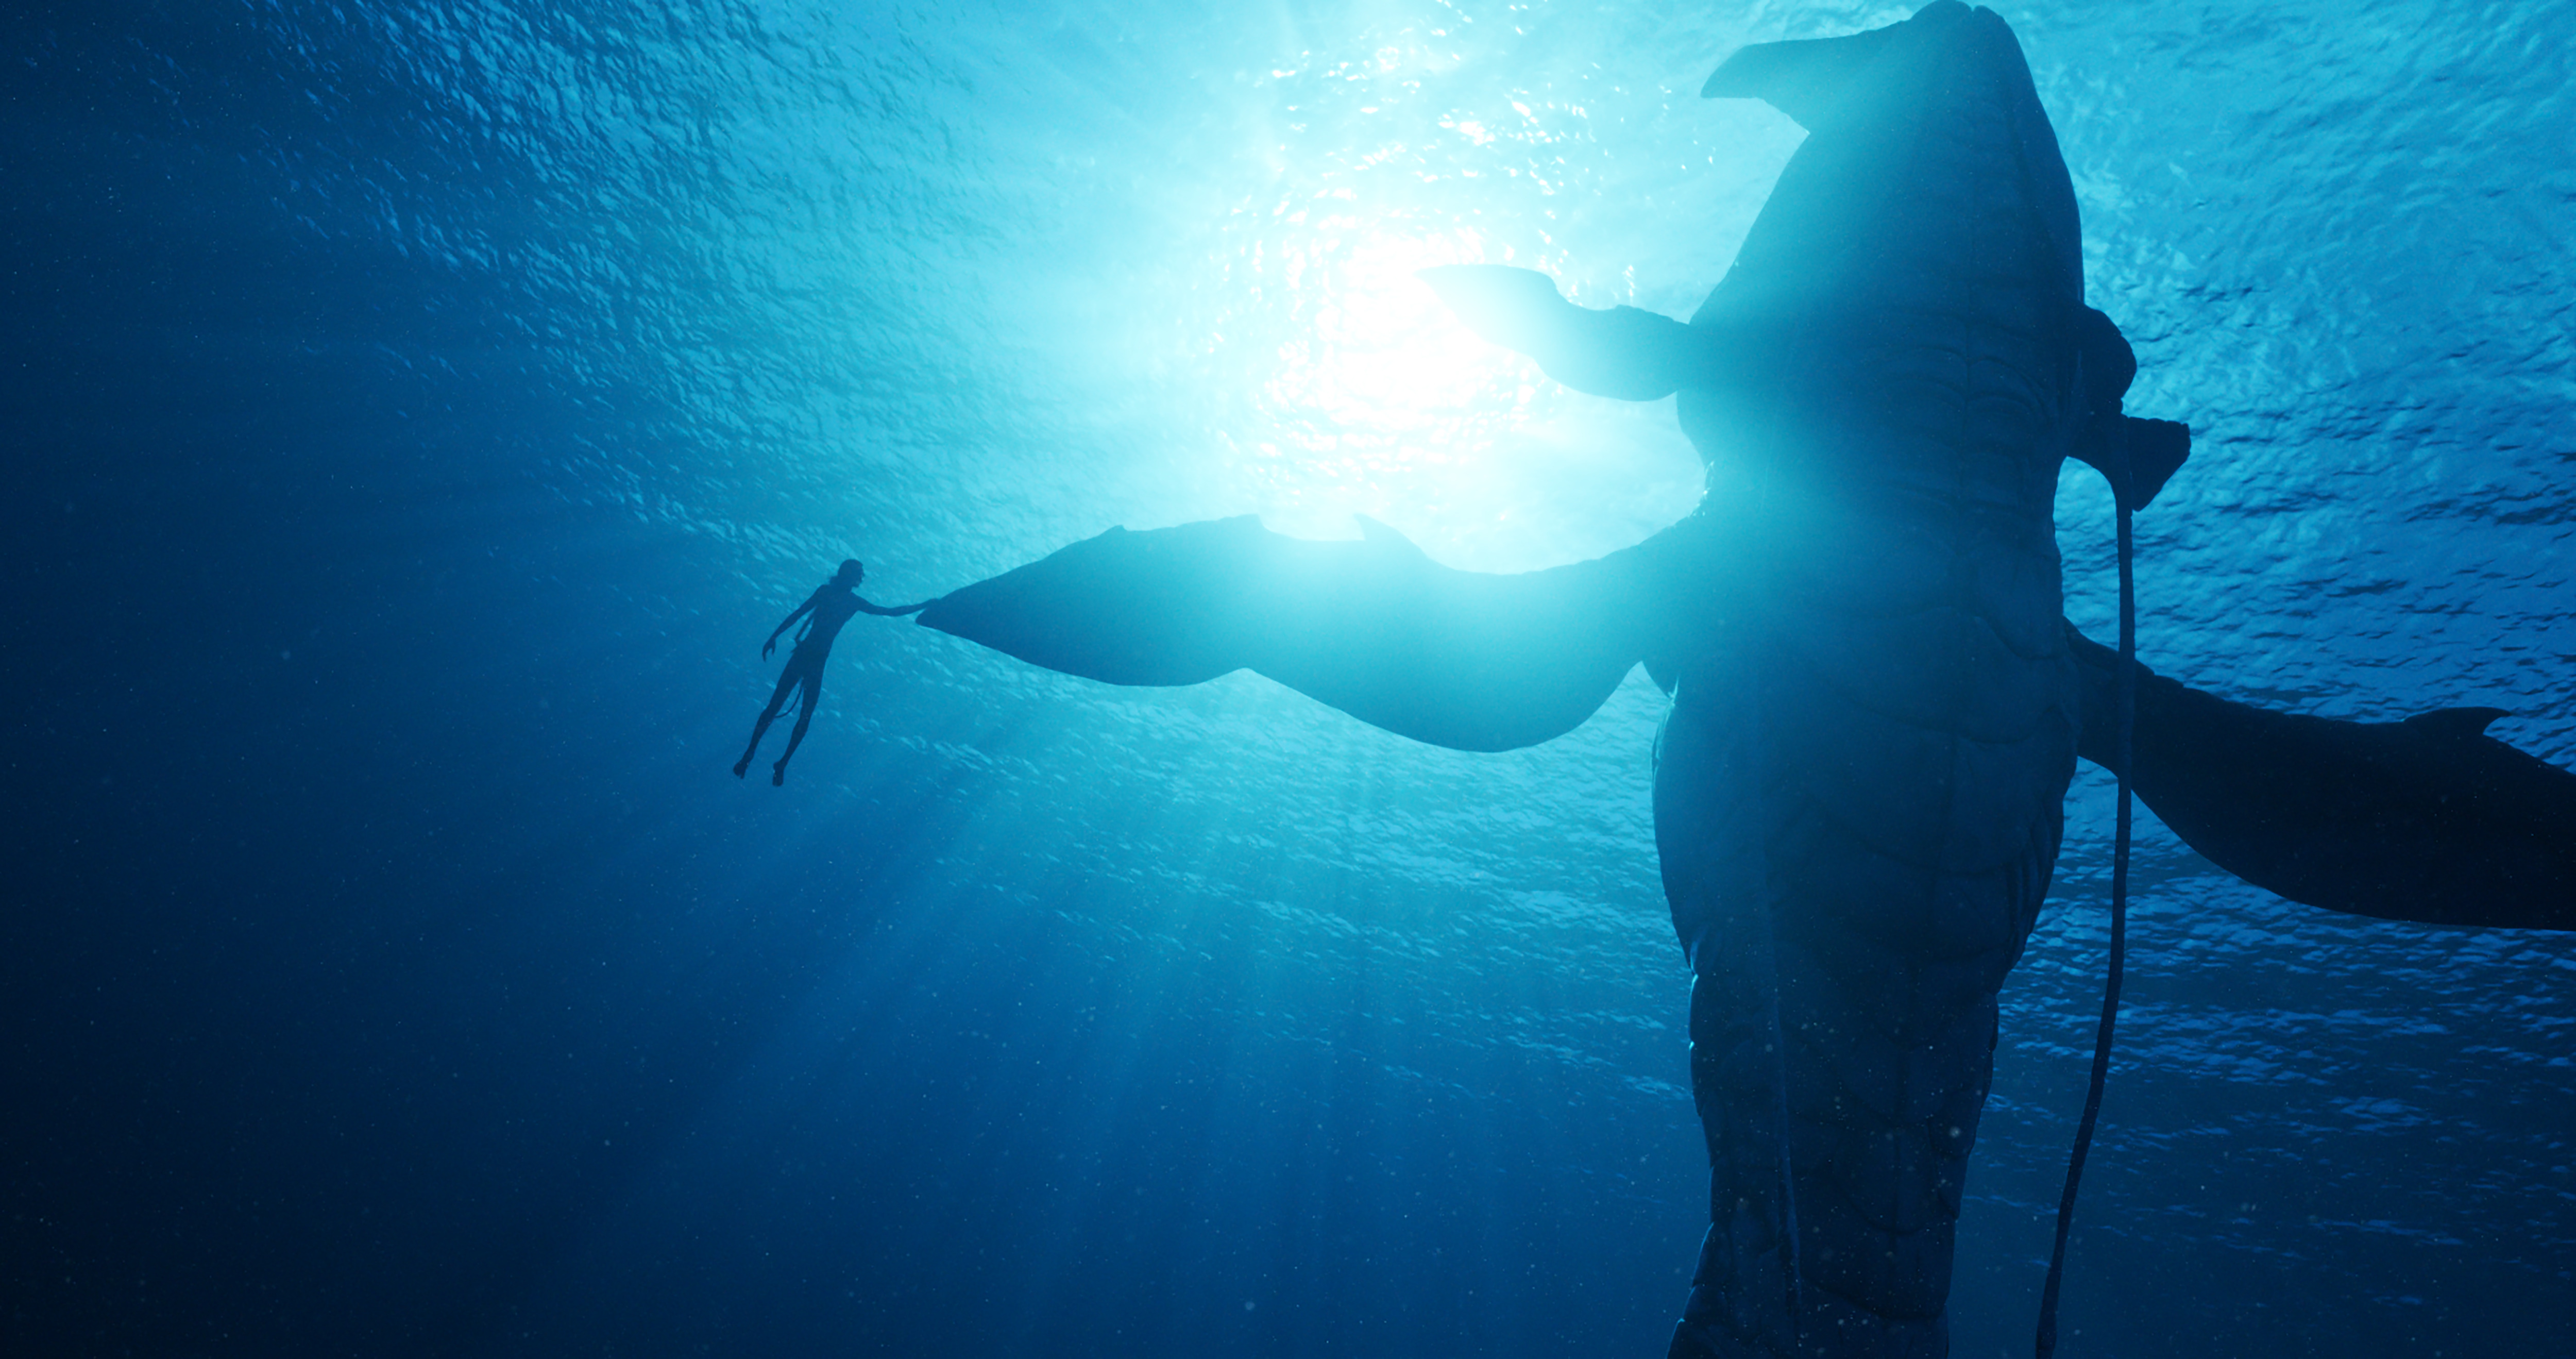 A space whale and a Na’vi teenager hold hands/fins underwater in Avatar: The Way of Water.